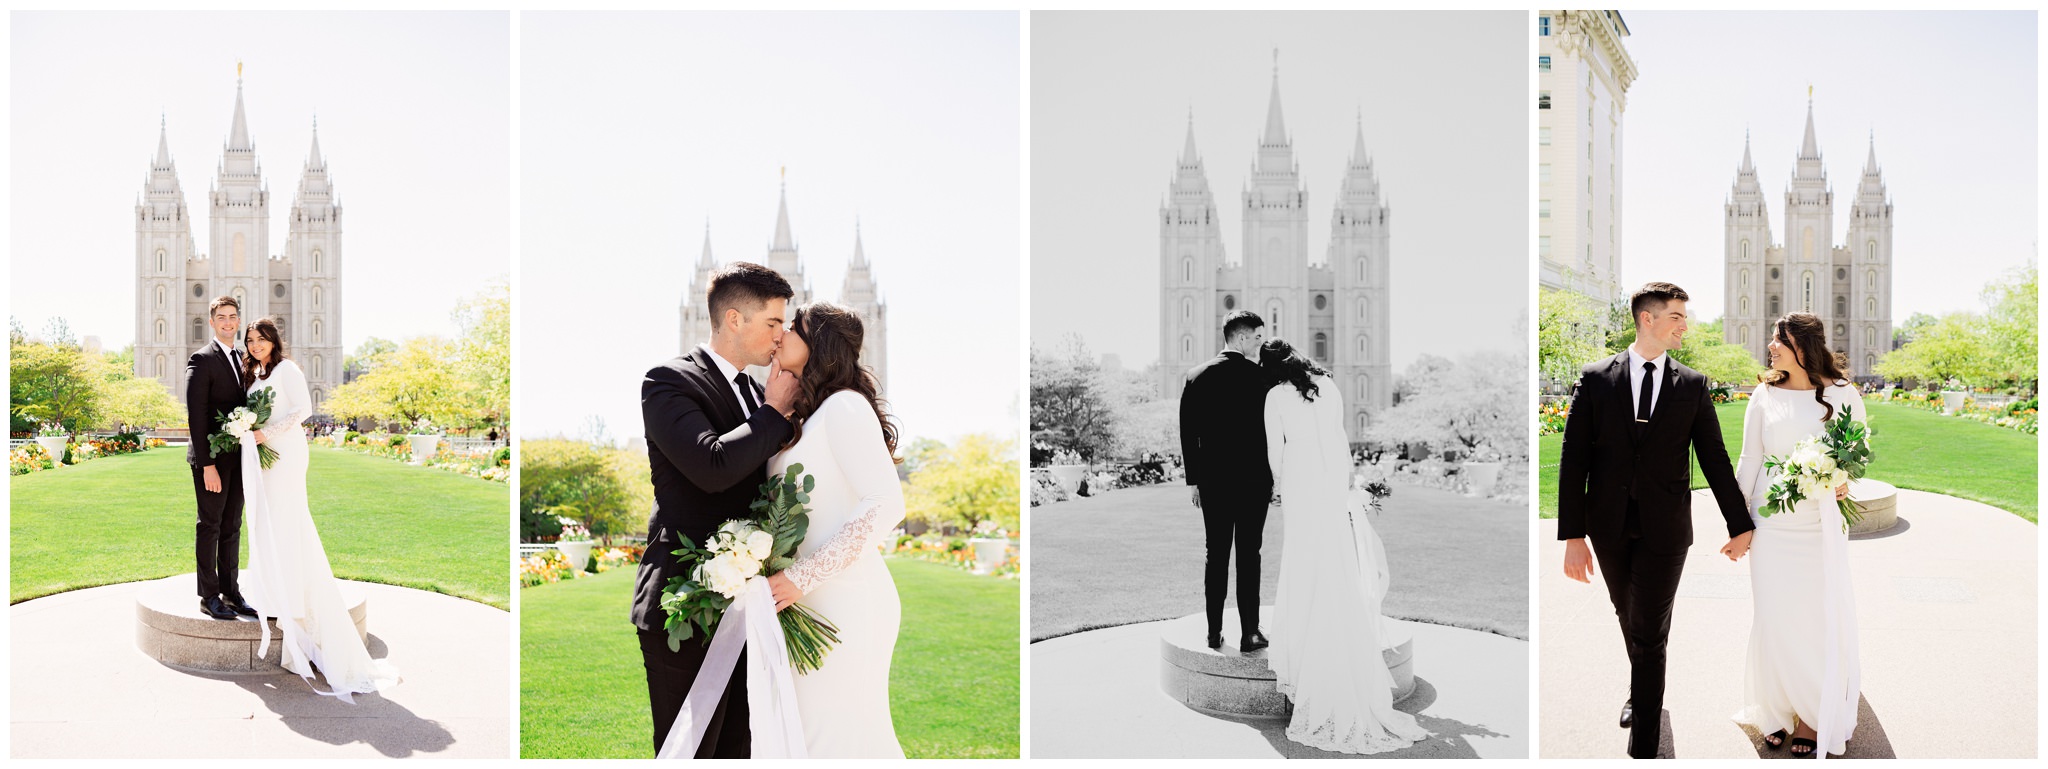 Bride and Groom in front of the Salt Lake City Temple Lds couple